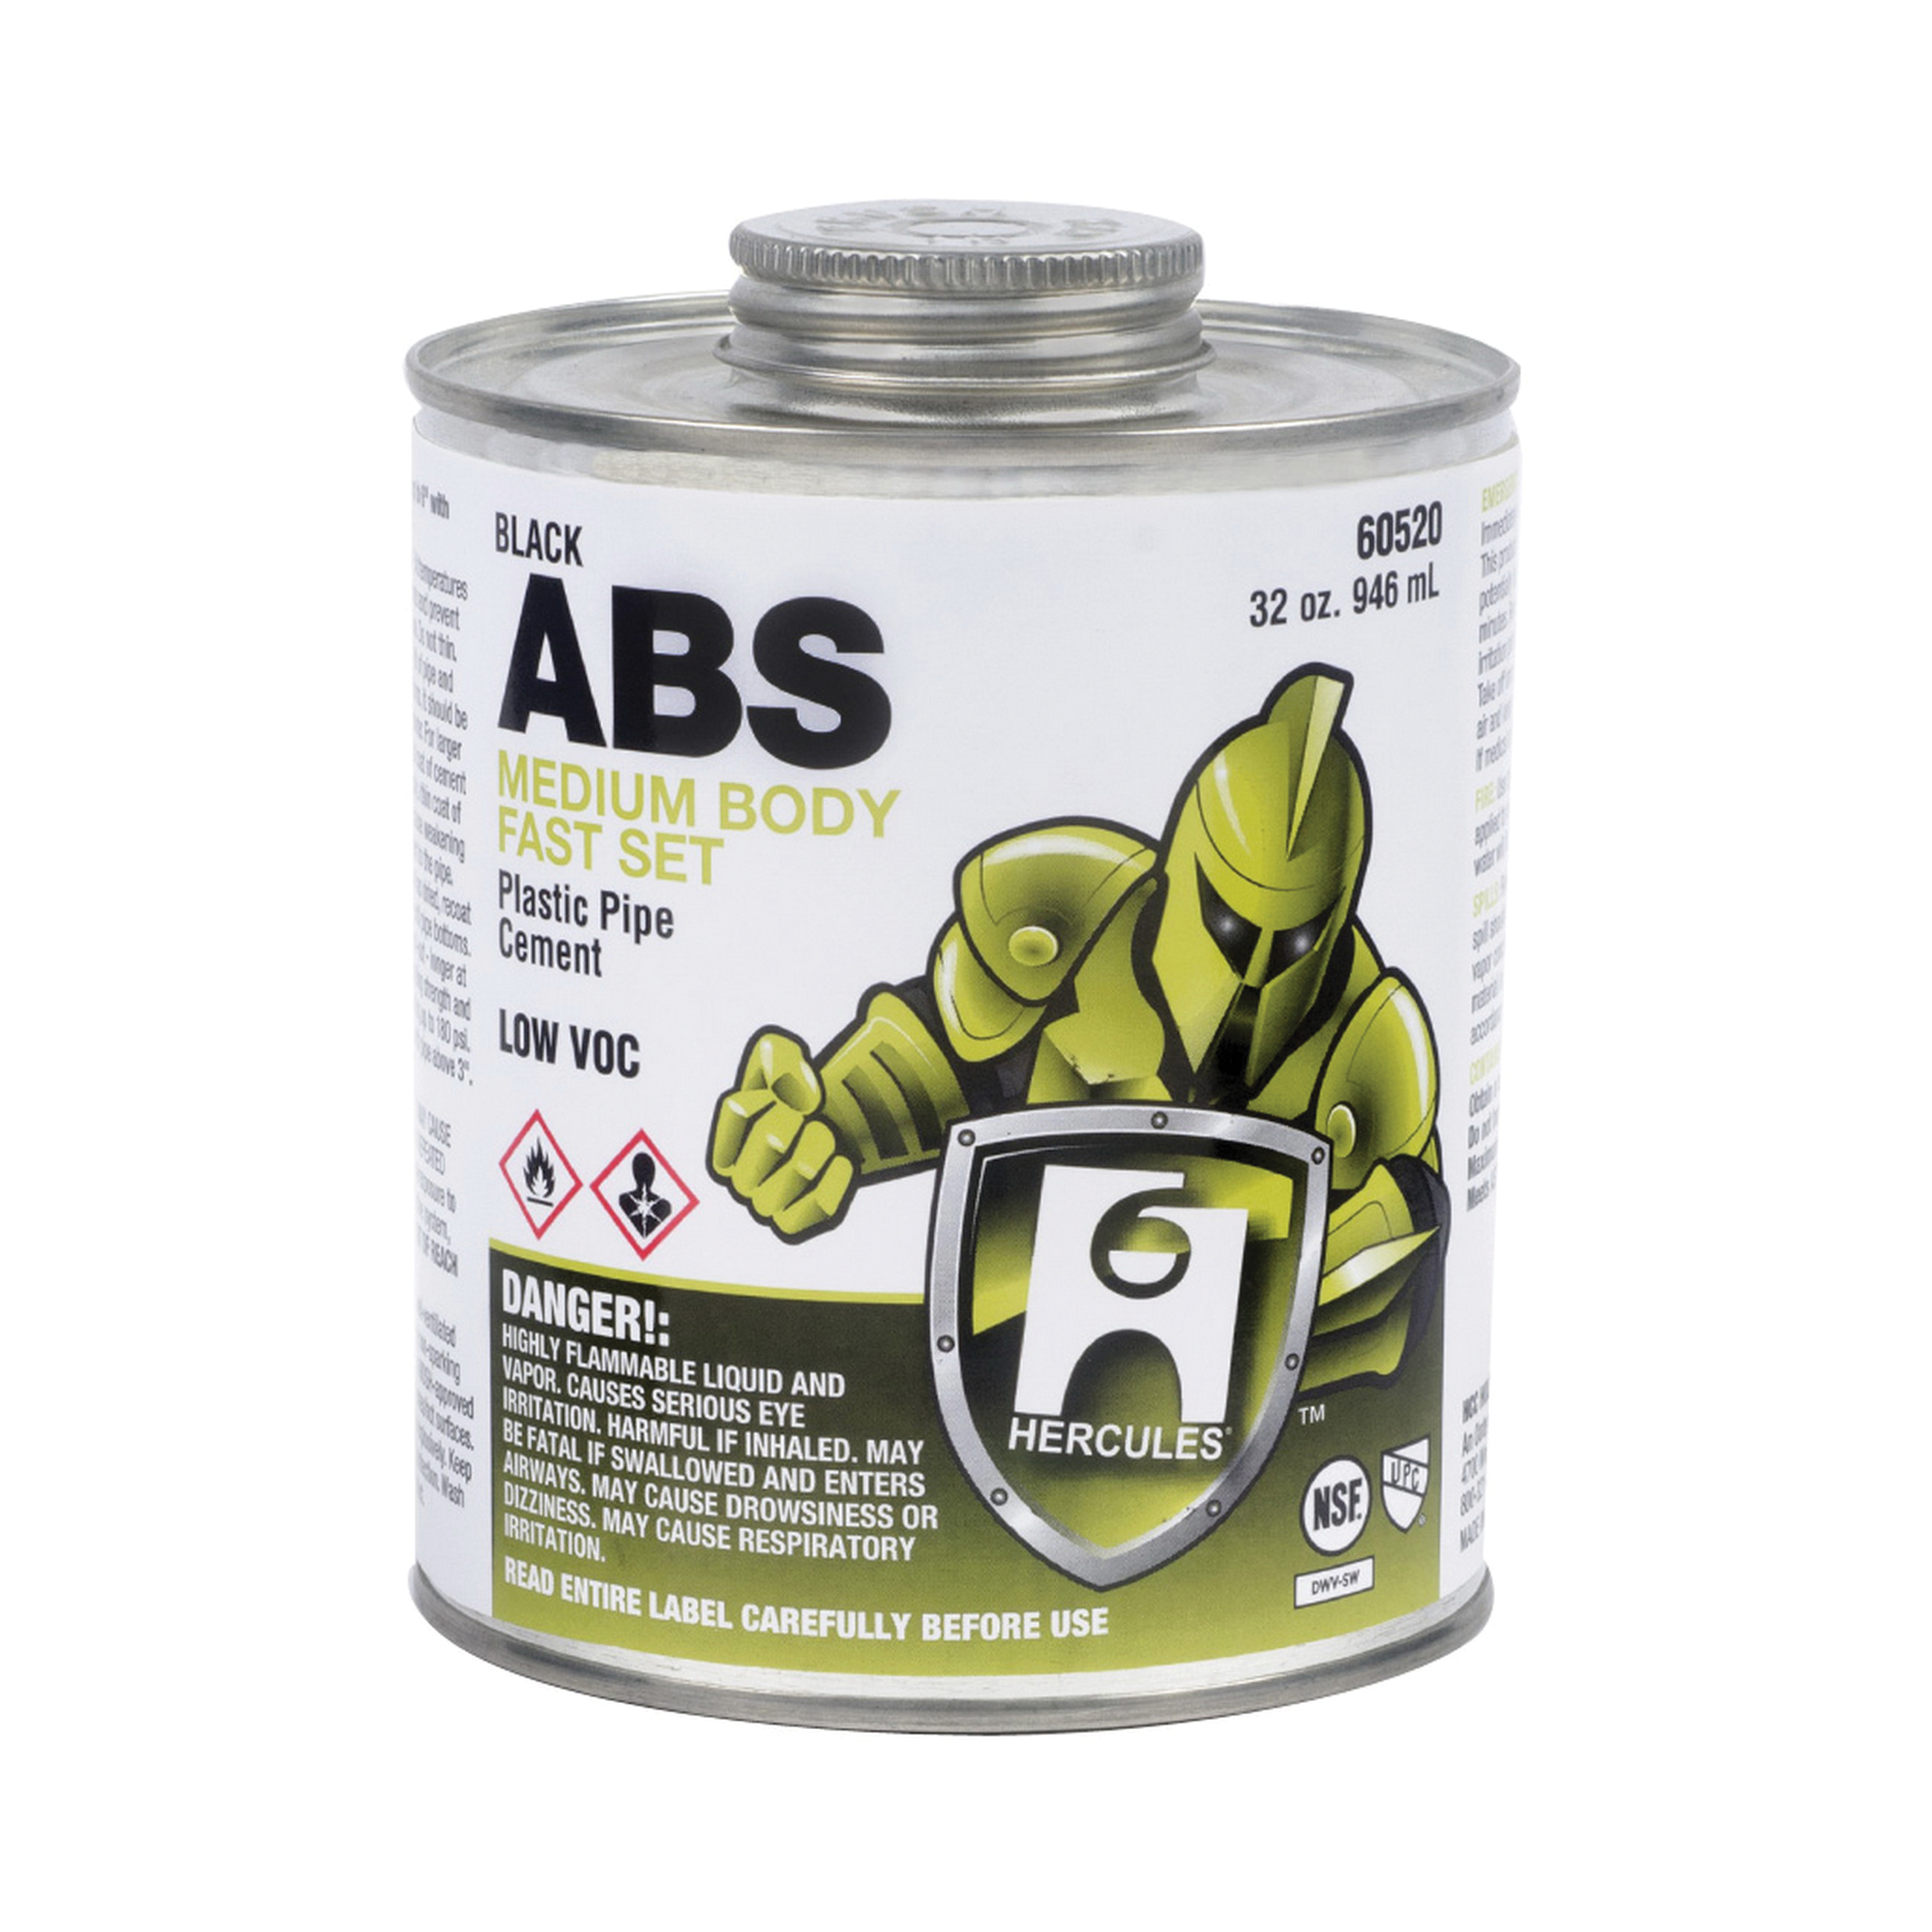 Hercules® 60515 Fast Set Low VOC Medium Body ABS Solvent Cement, 16 oz Container, Black, For Use With All Classes and Schedules ABS Pipe and Fittings Upto 6 in Dia/8 in Dia with Interference Fit